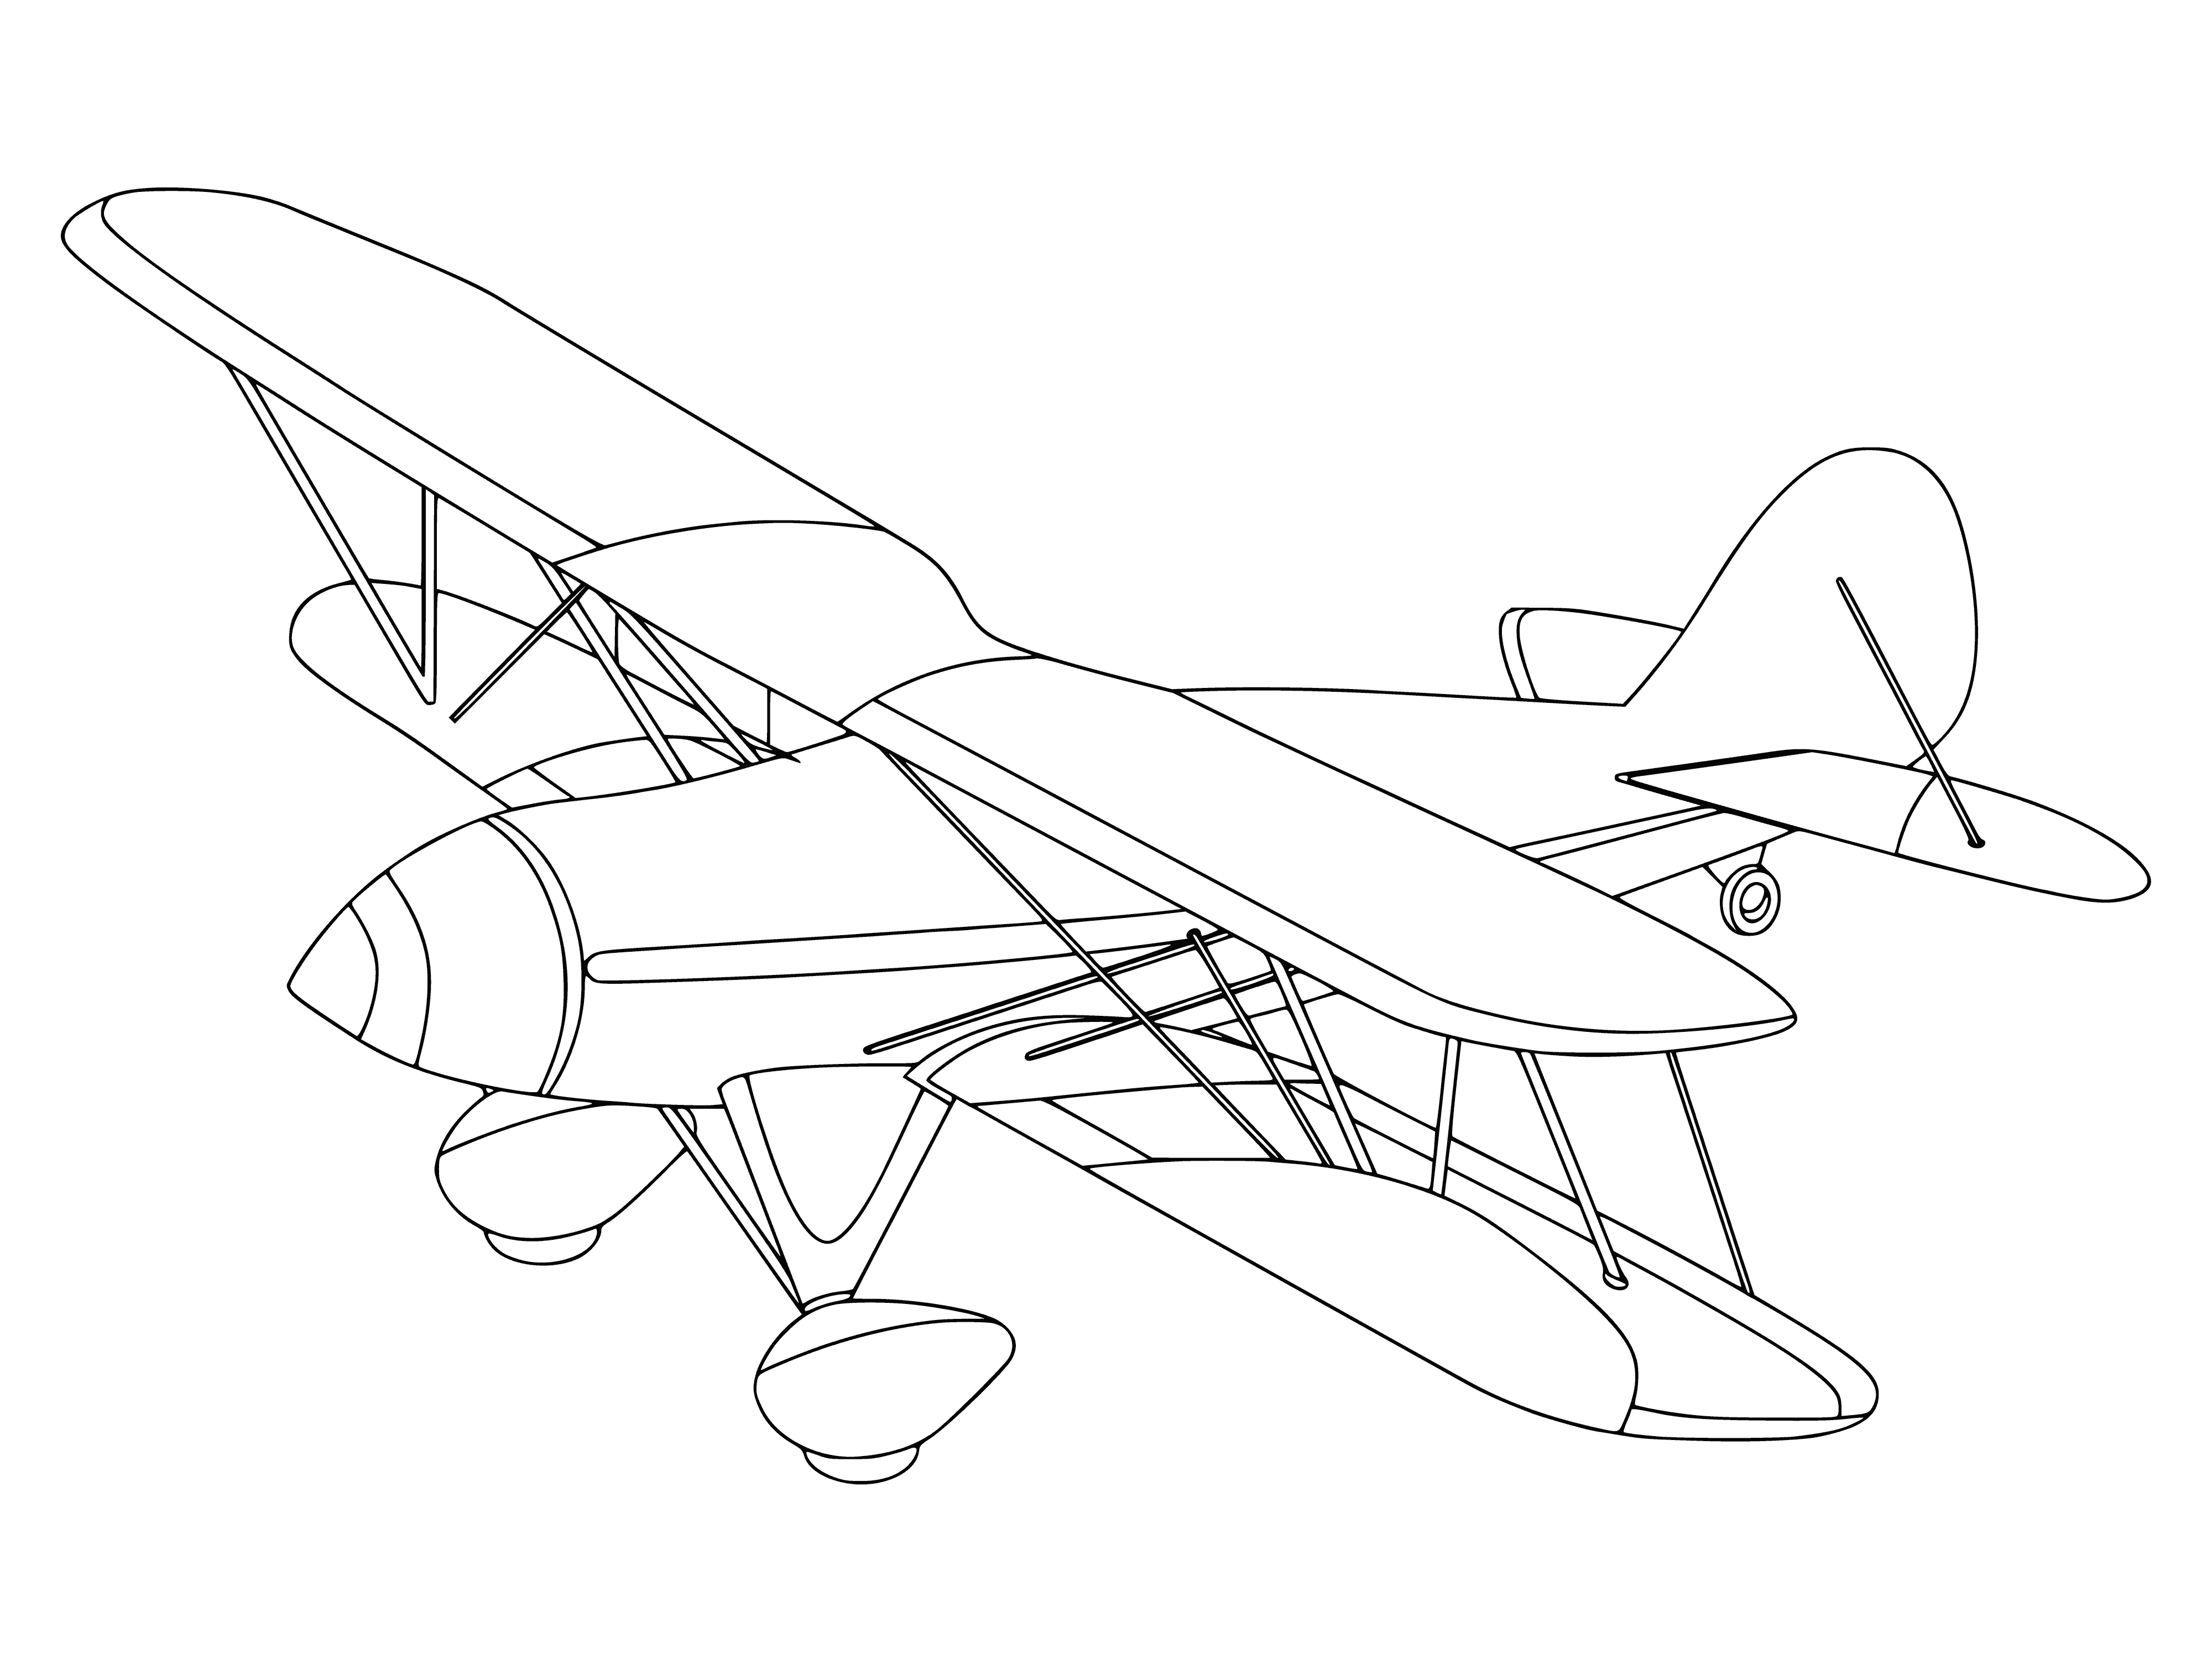 coloring page: Biplane with blue/white stripes and cockpit, engine at front, wings attached to fuselage, two sets of landing gear under each wing.